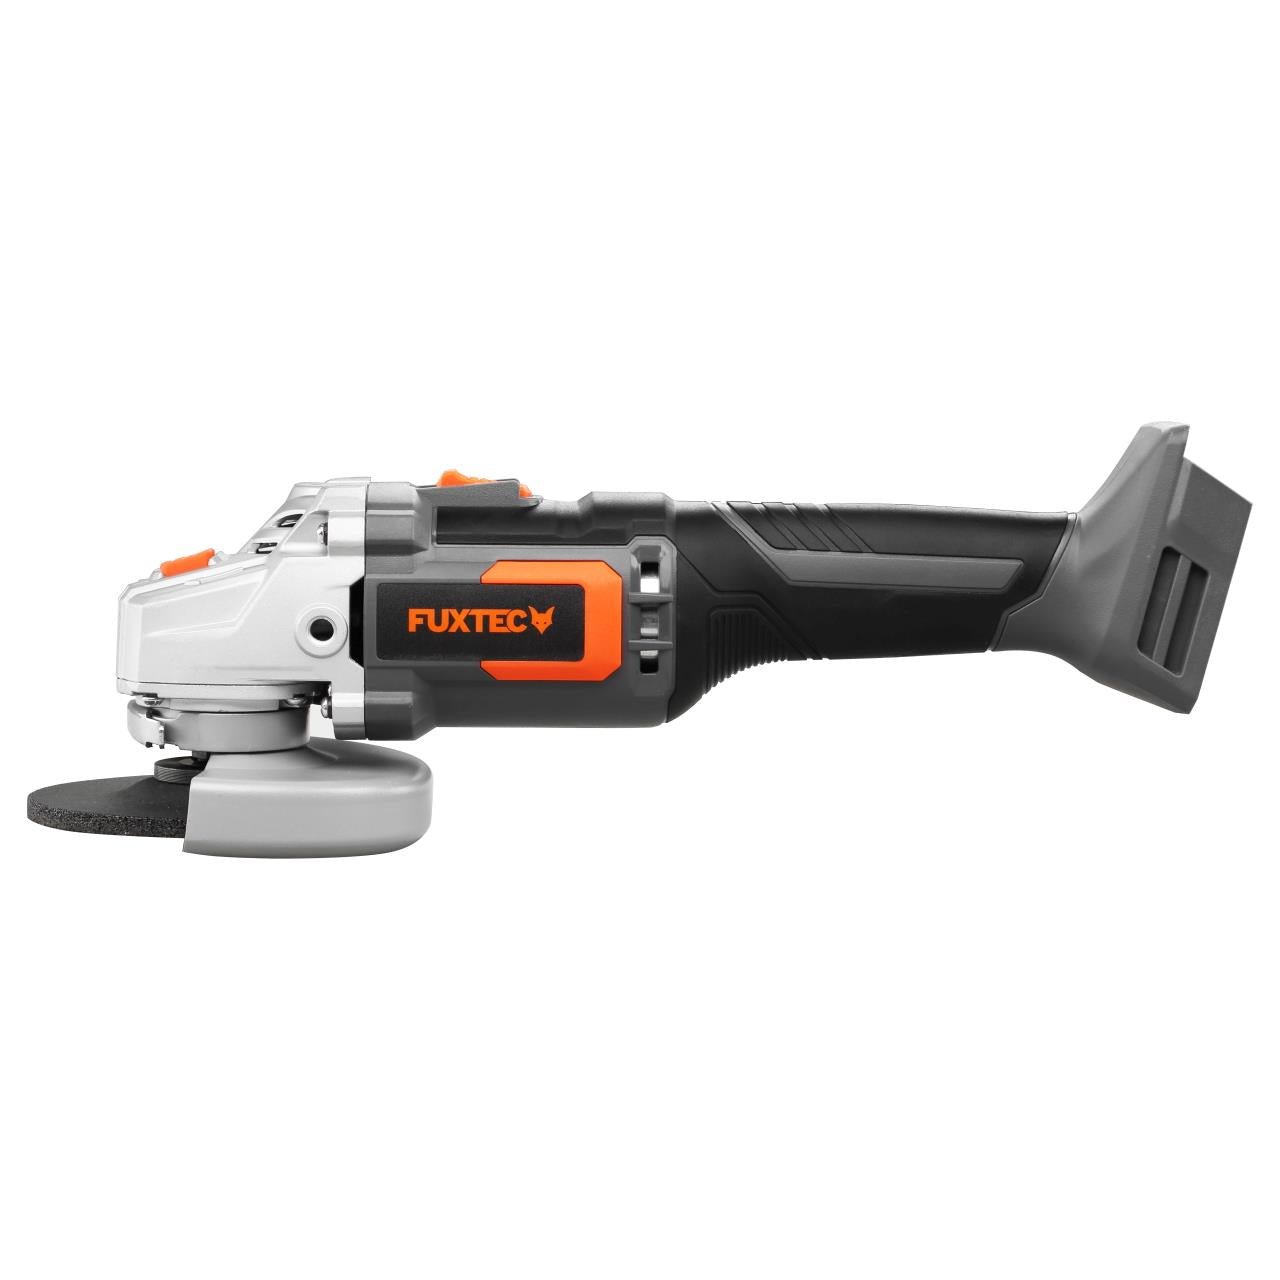 20V cordless angle grinder - Kit FUXTEC FX-E1WS20 incl. battery (2Ah) and charger (1A)